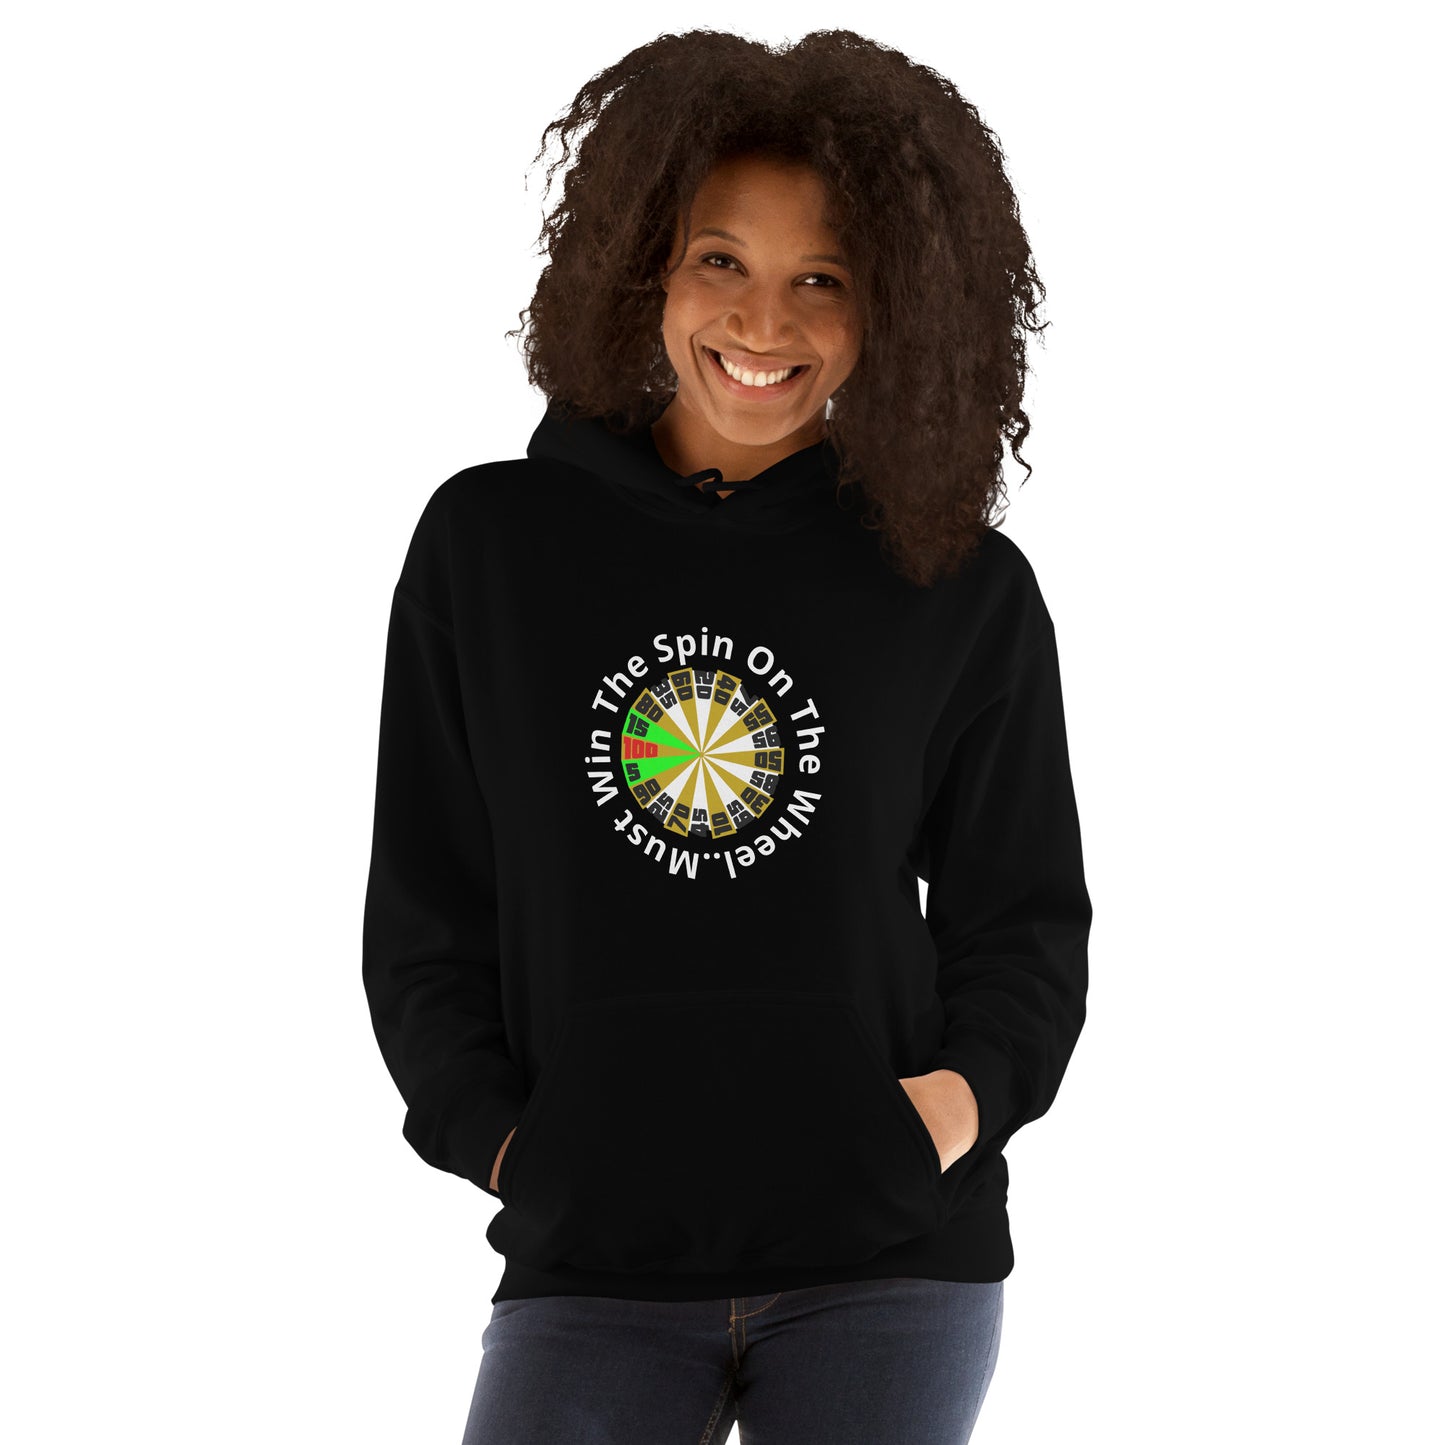 Unisex Hoodie - The Price Is Right - Spin The Wheel on Front - Greeting to Family & Friends on Back